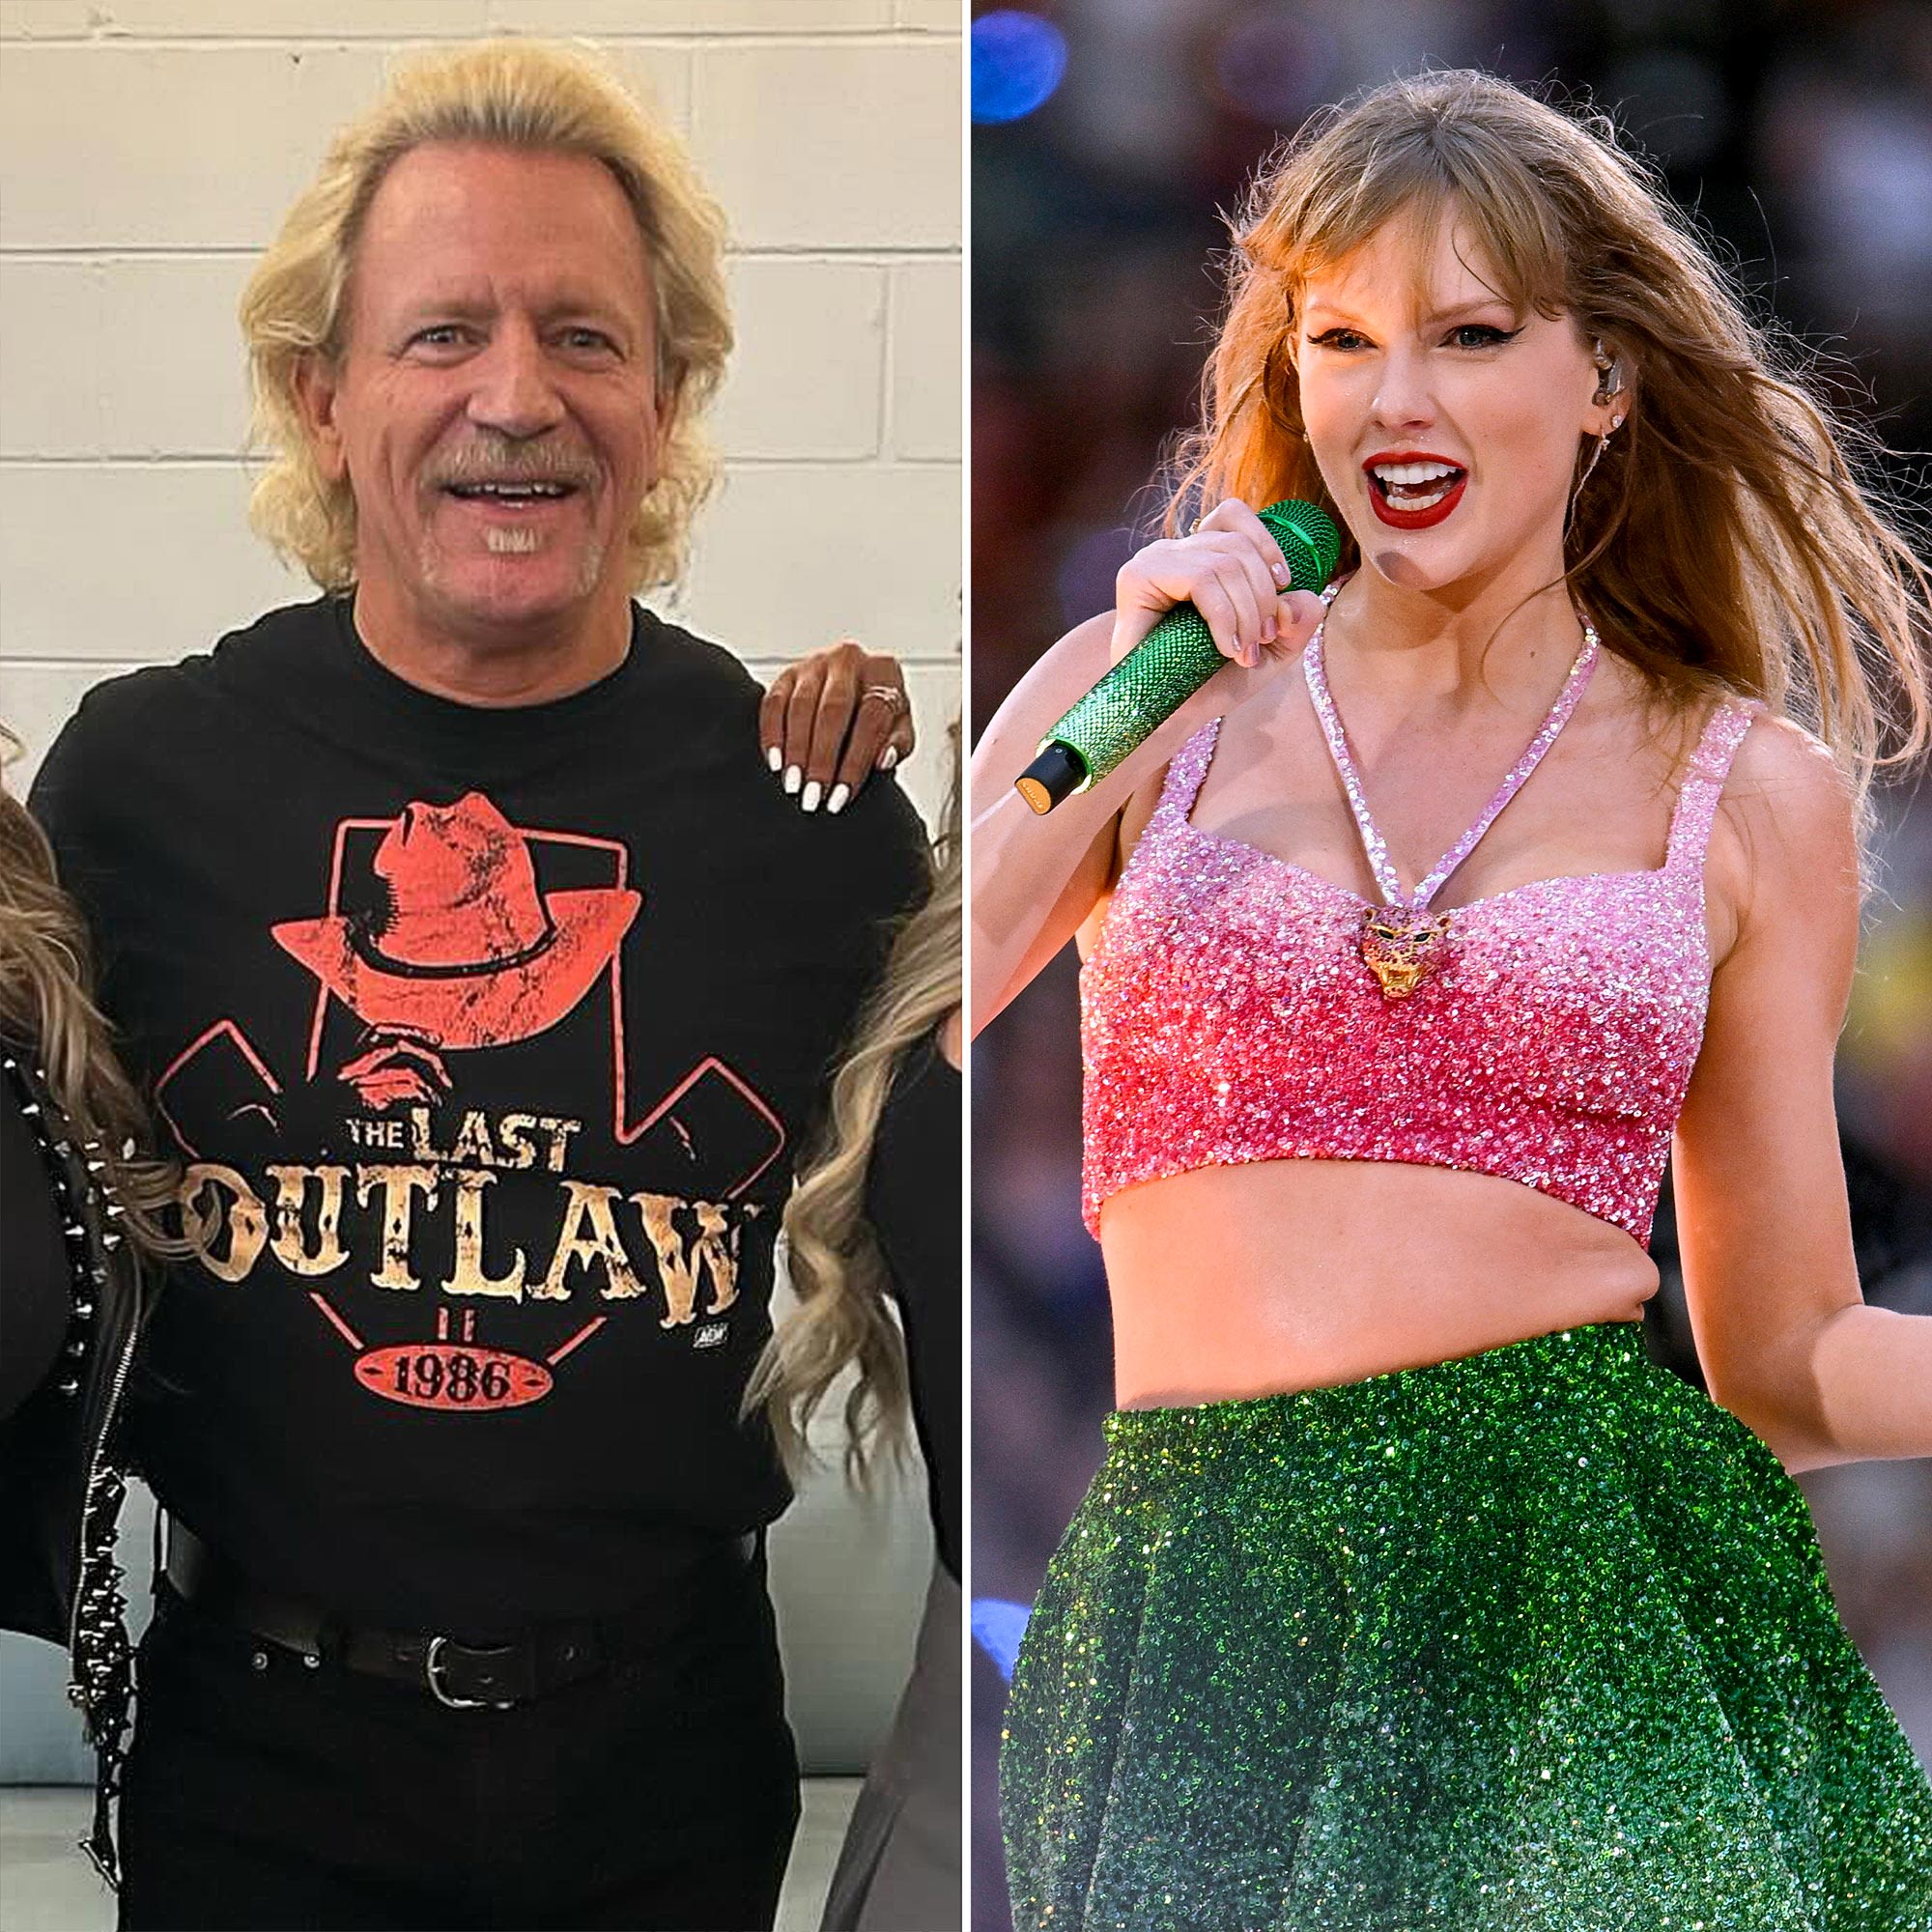 Pro Wrestling Icon Jeff Jarrett Says Taylor Swift Watched His Daughters During Wife’s Cancer Battle